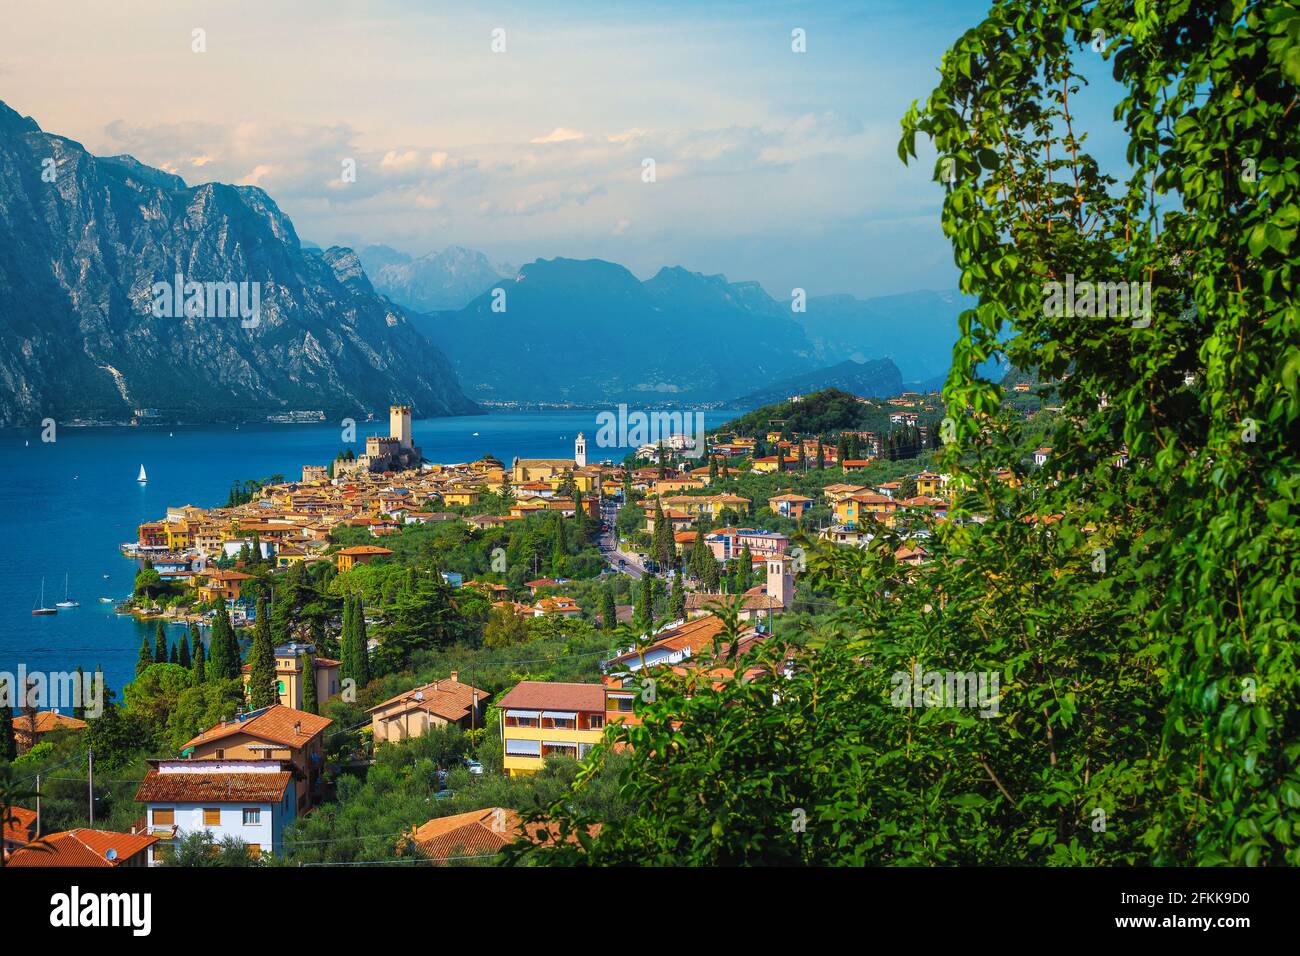 Malcesine cityscape with lake Garda view from the hill. Famous travel and touristical destination, Italy, Europe Stock Photo